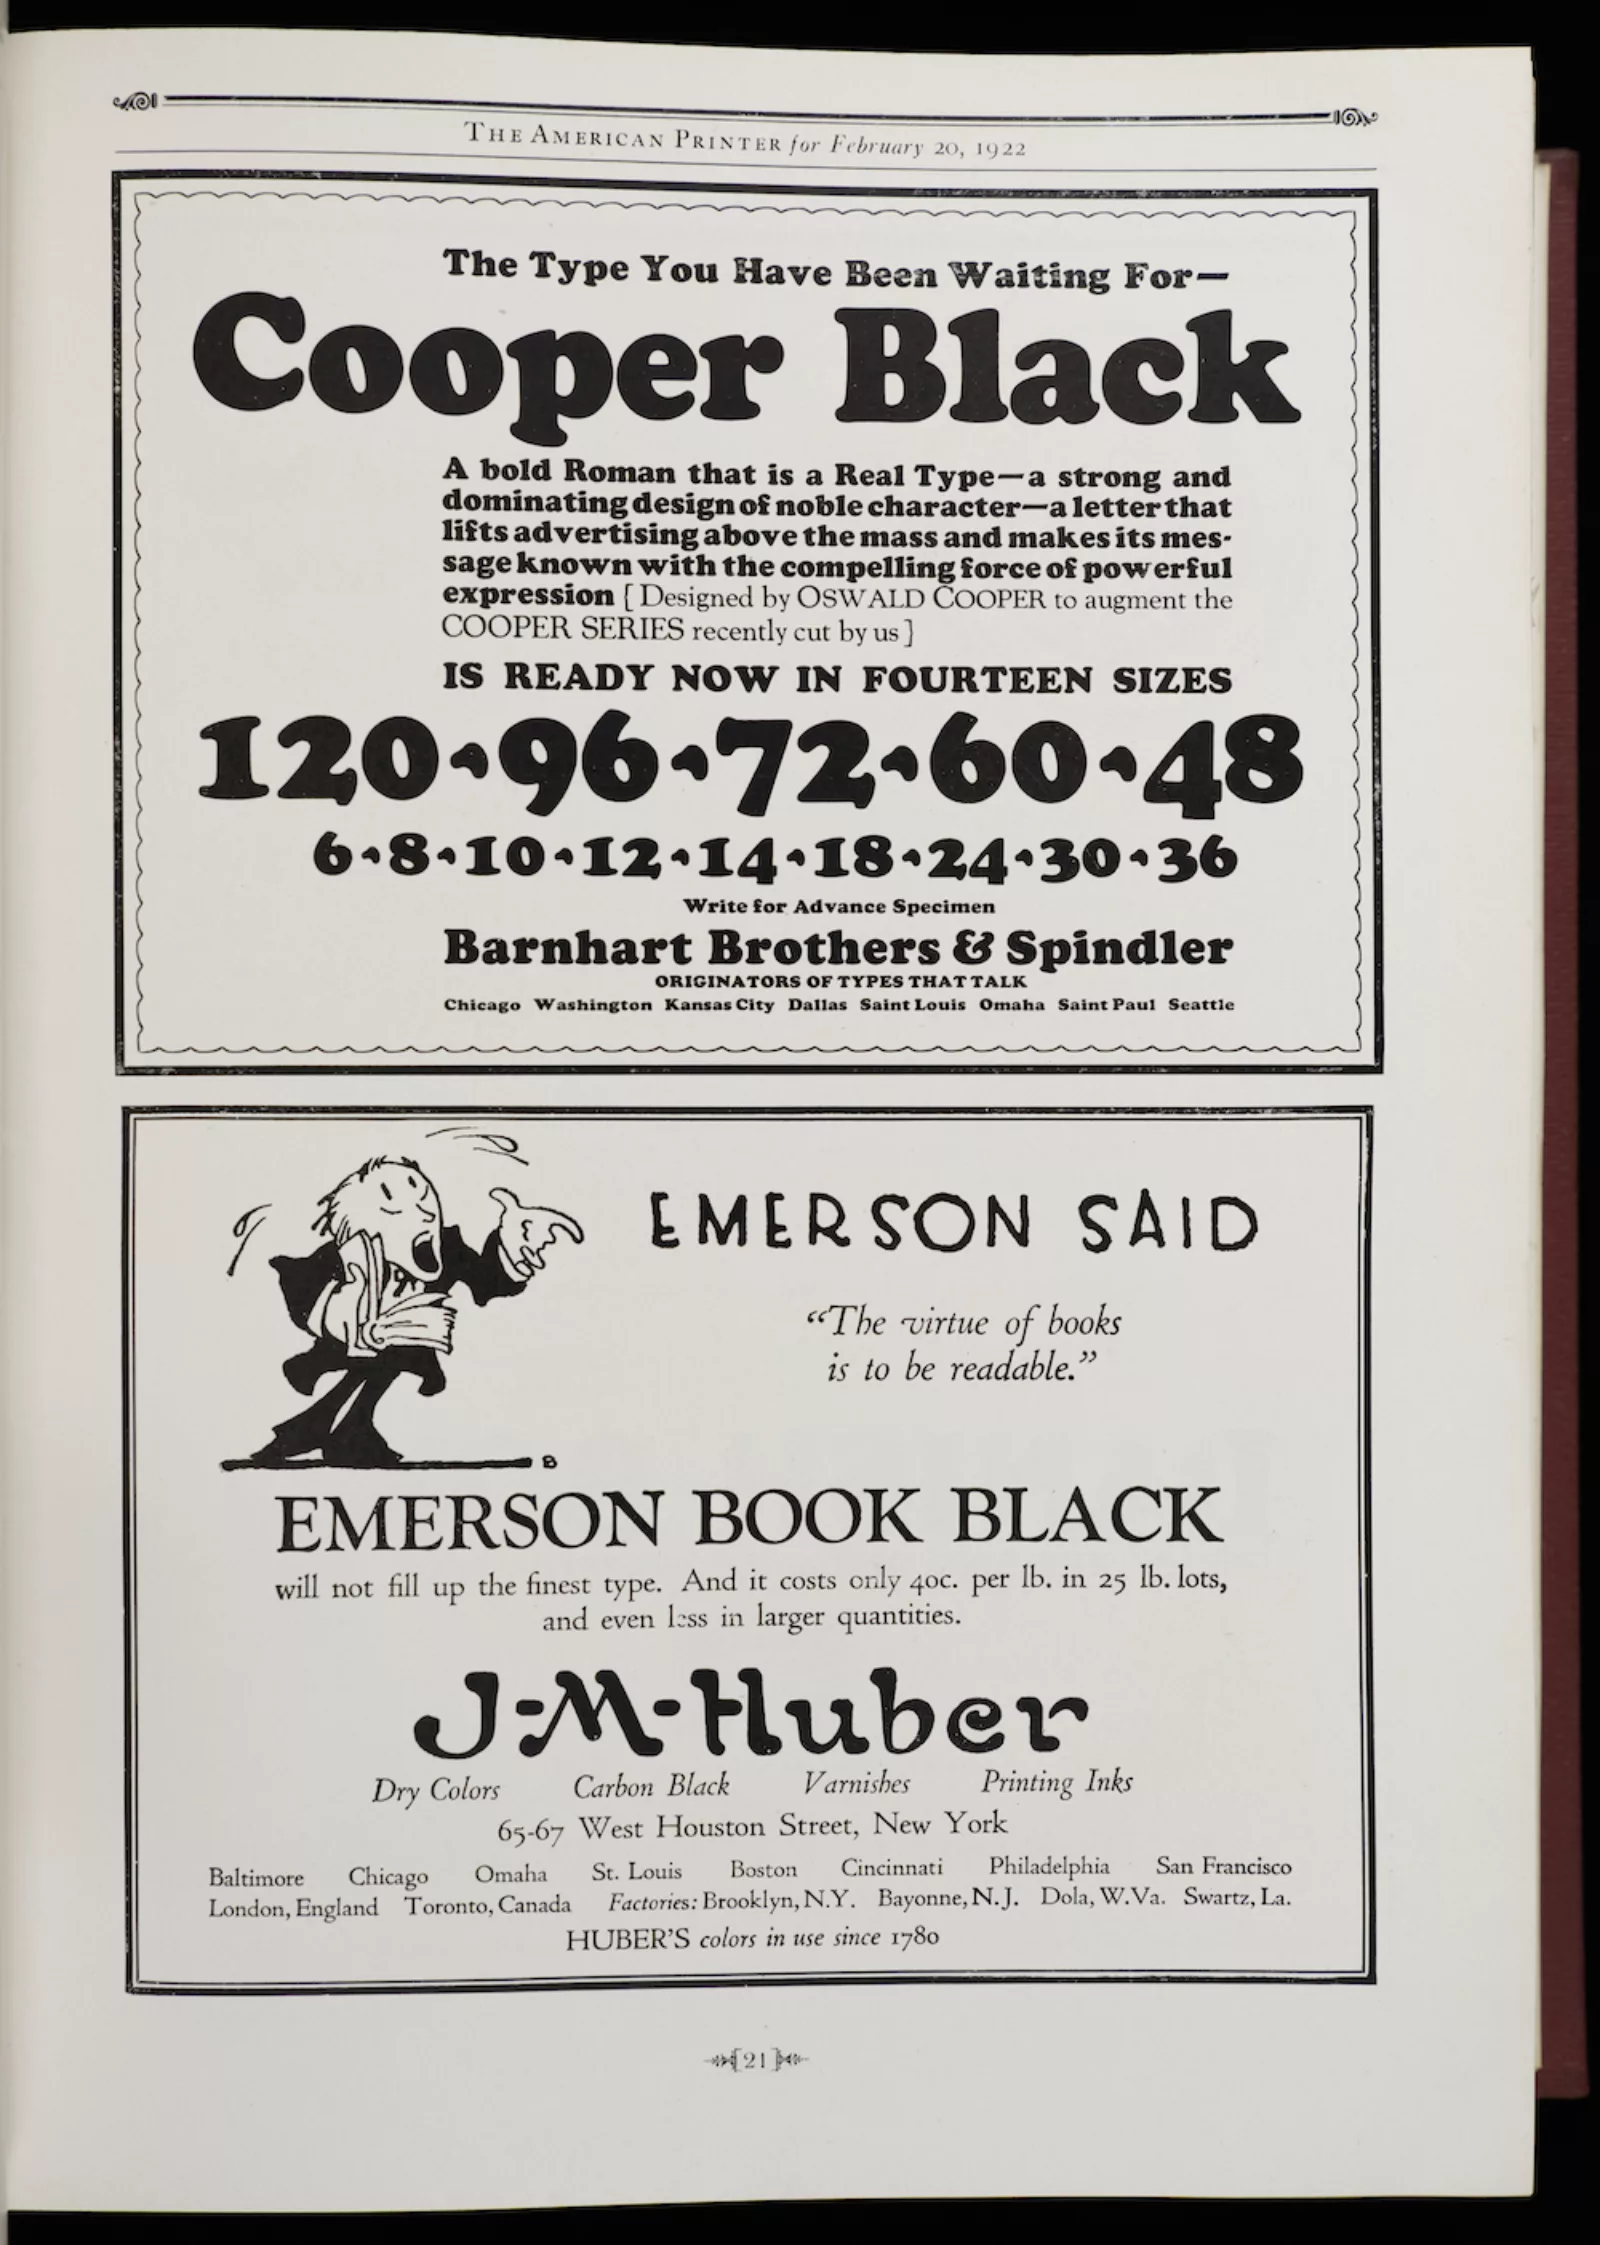 An ad for Cooper Black announces the arrival of the typeface with the words "The Type You Have Been Waiting For."